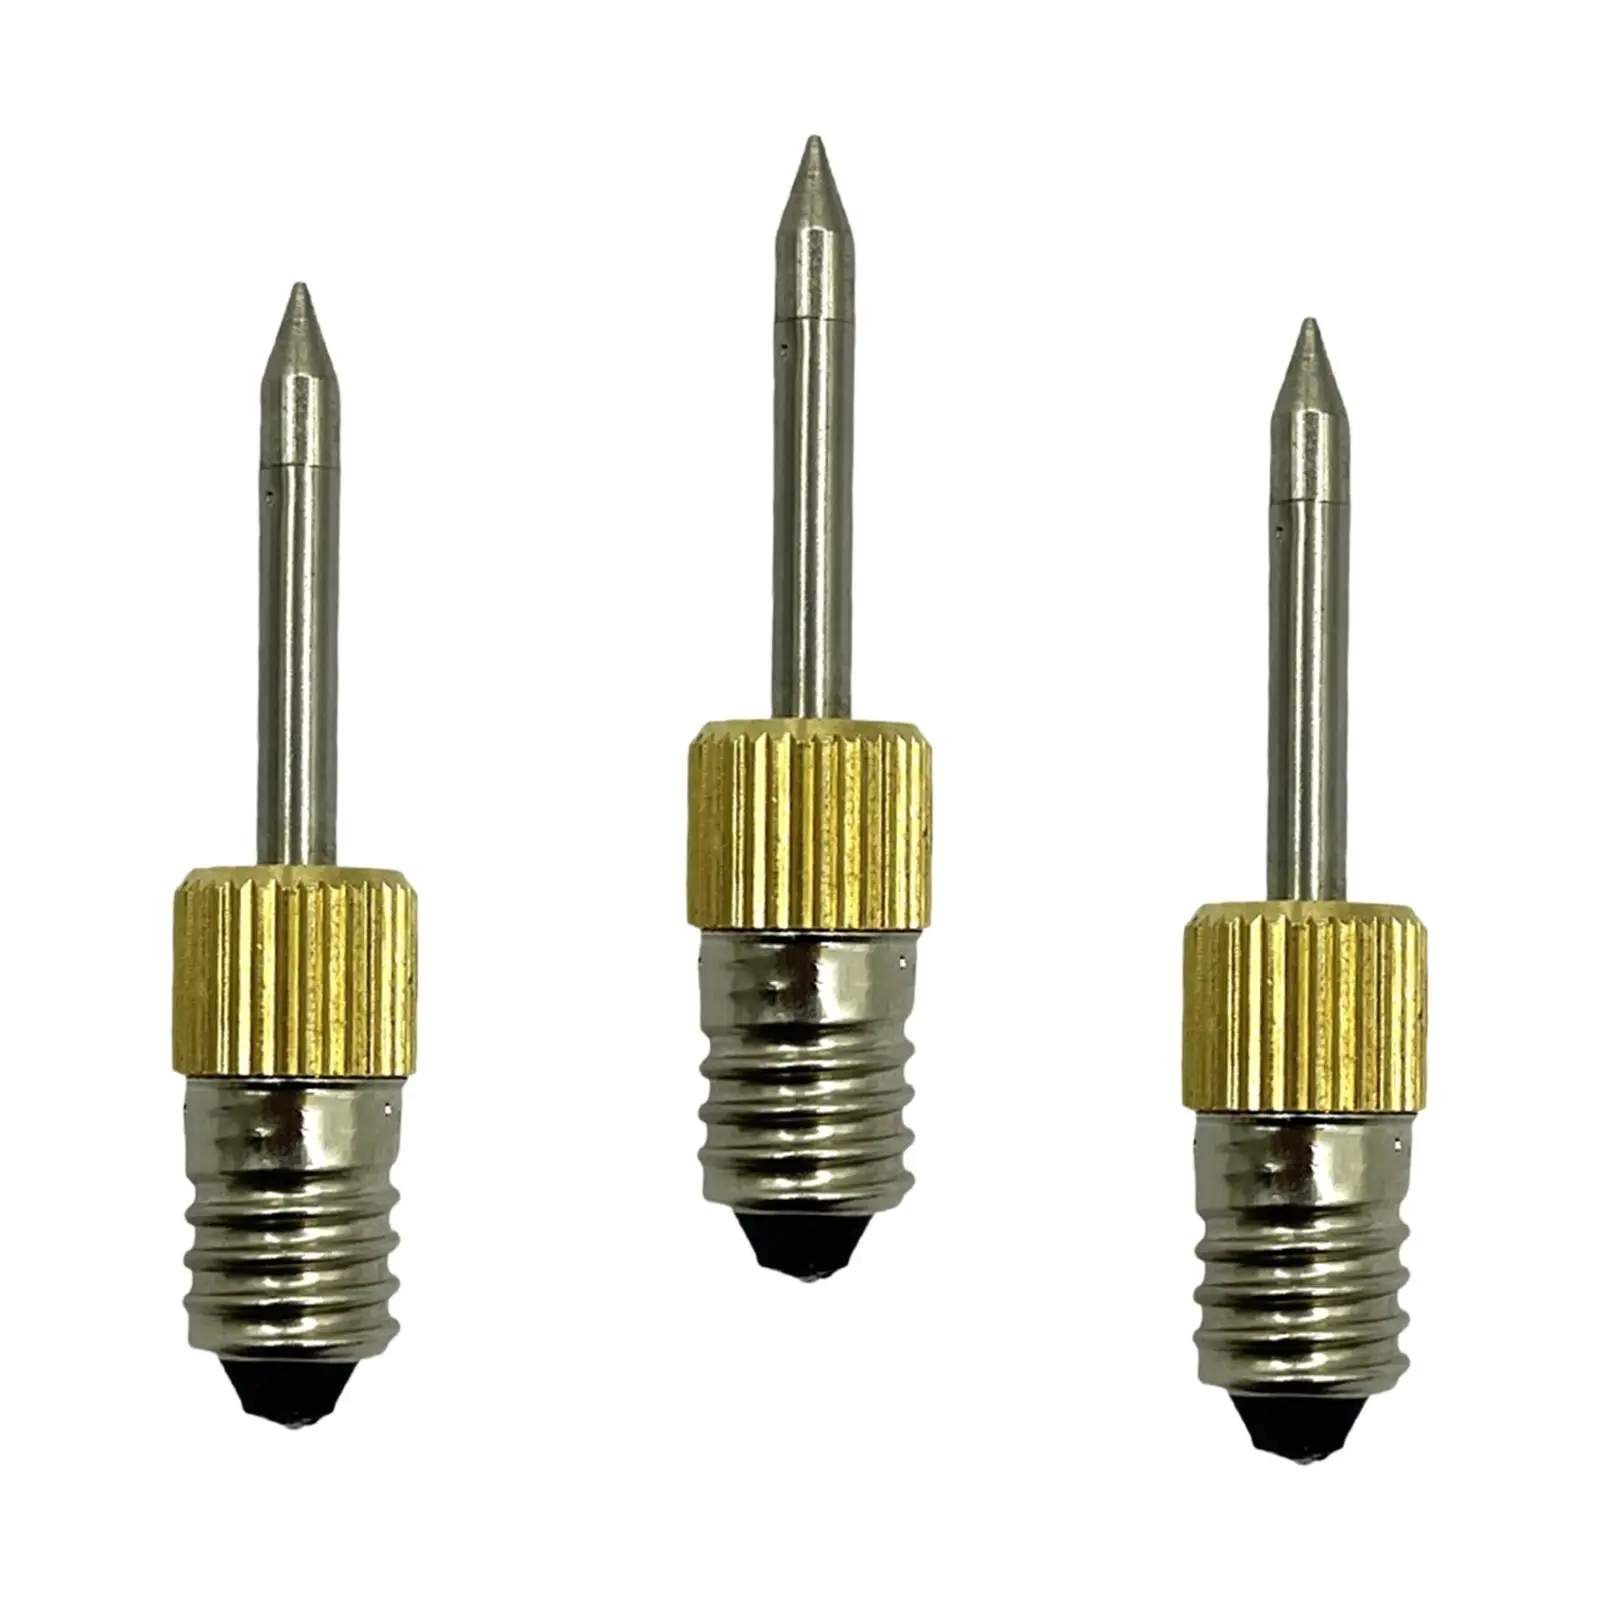 Soldering Iron Tips Threaded Solder Welding Tips Professional for Tool , 3pcs Gold